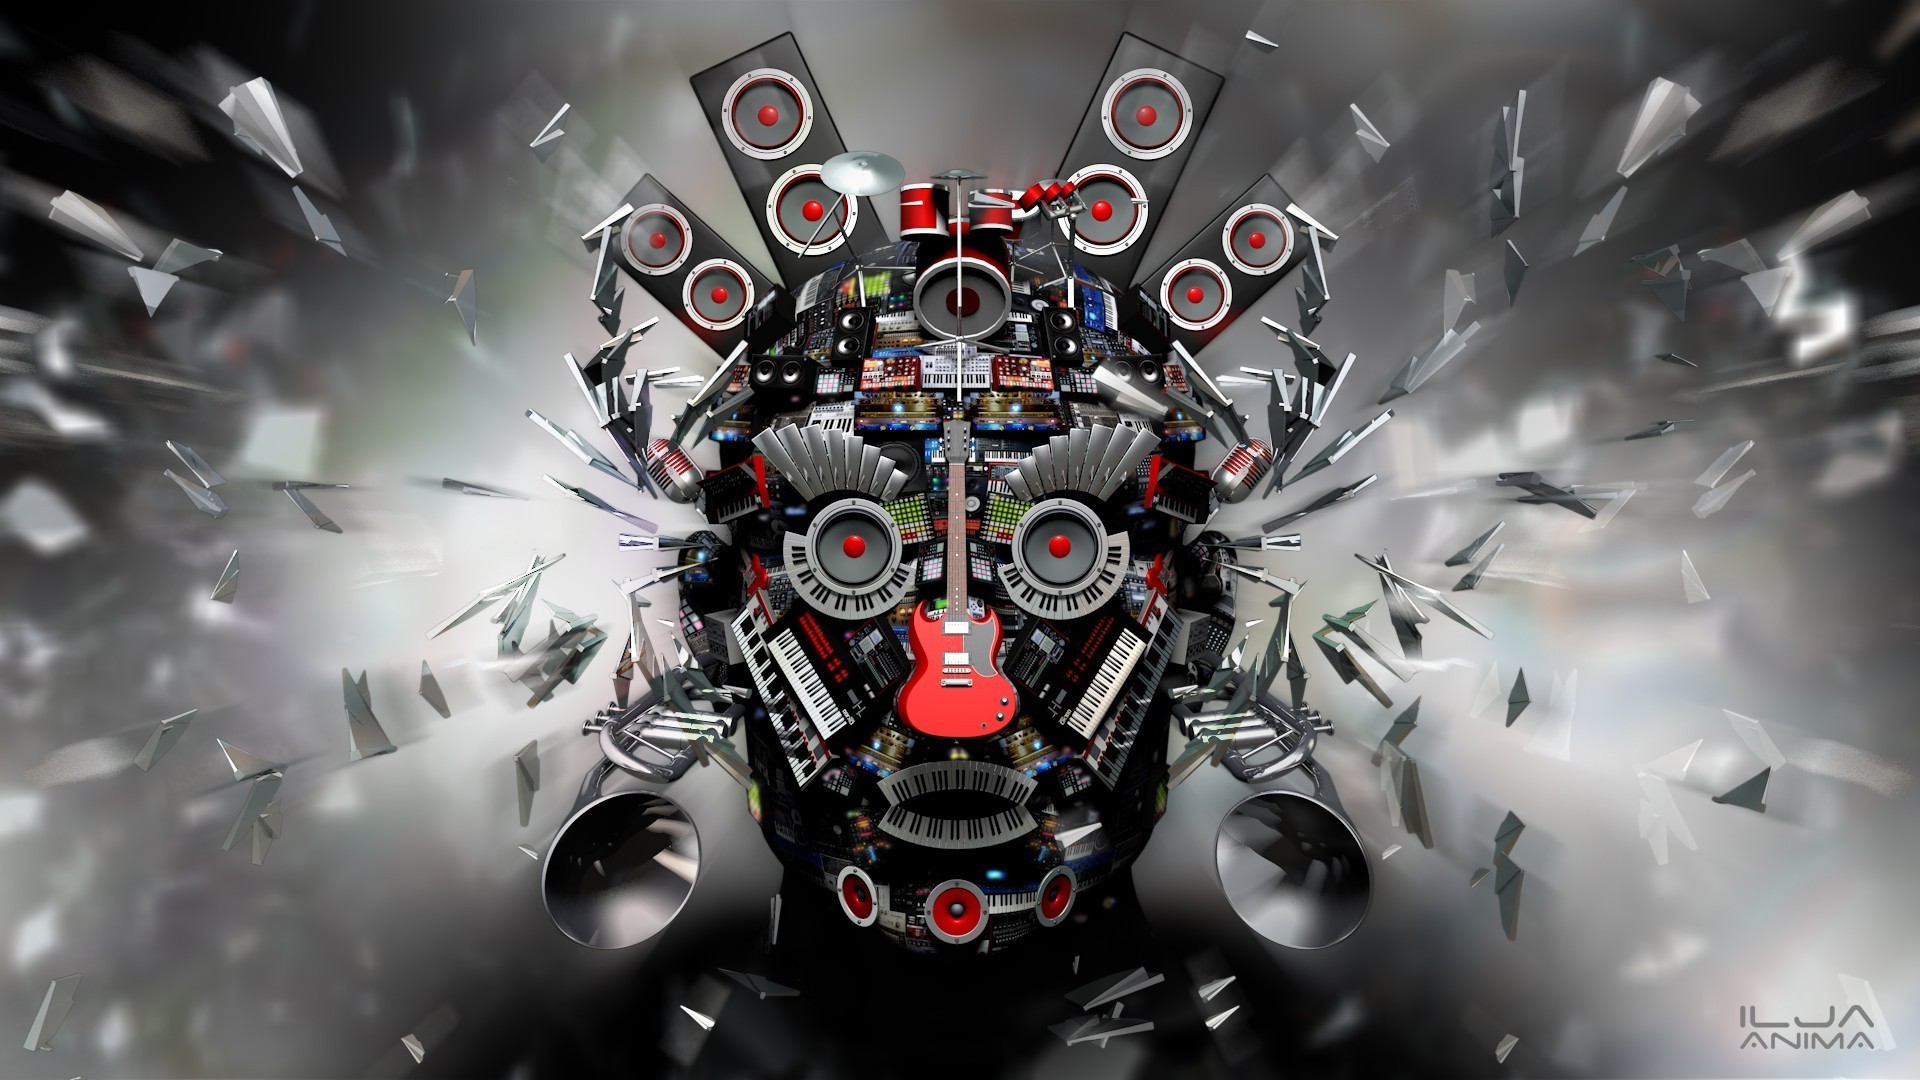 General 1920x1080 digital art CGI face music guitar keyboards drums microphone trumpet speakers eyes open mouth explosion